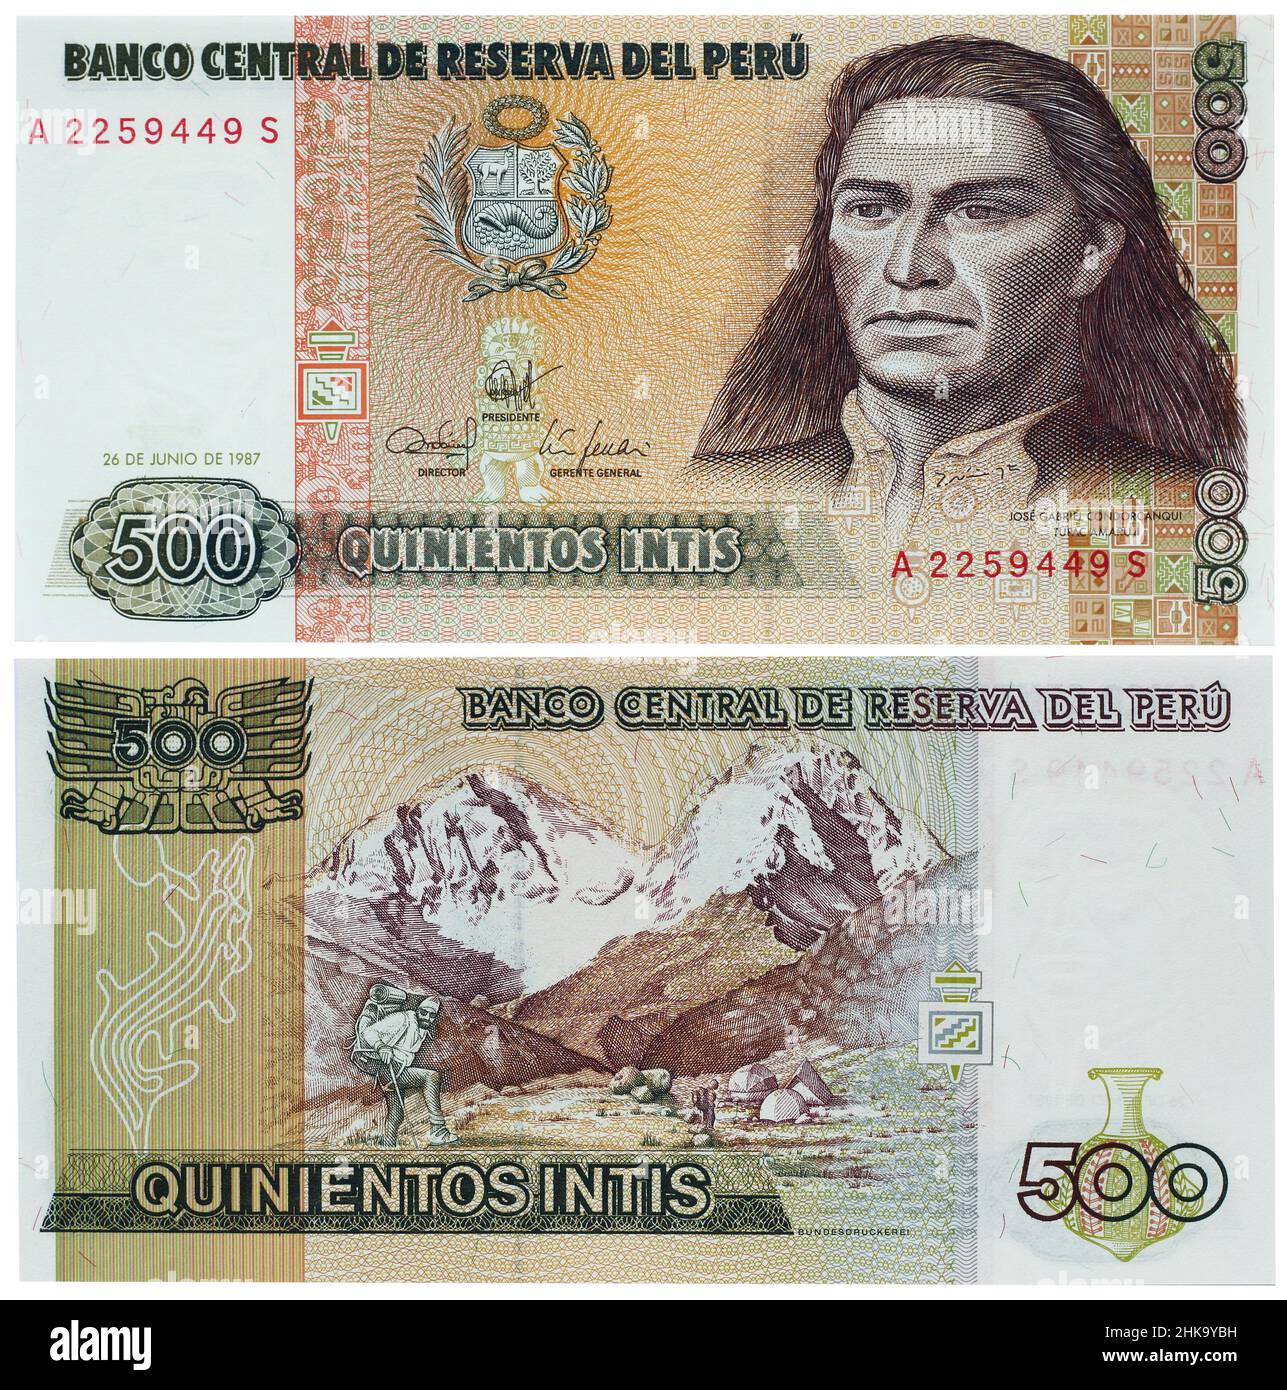 Banknote of  Peru  old  currency-  five hundred   intis. Isolated macro Stock Photo